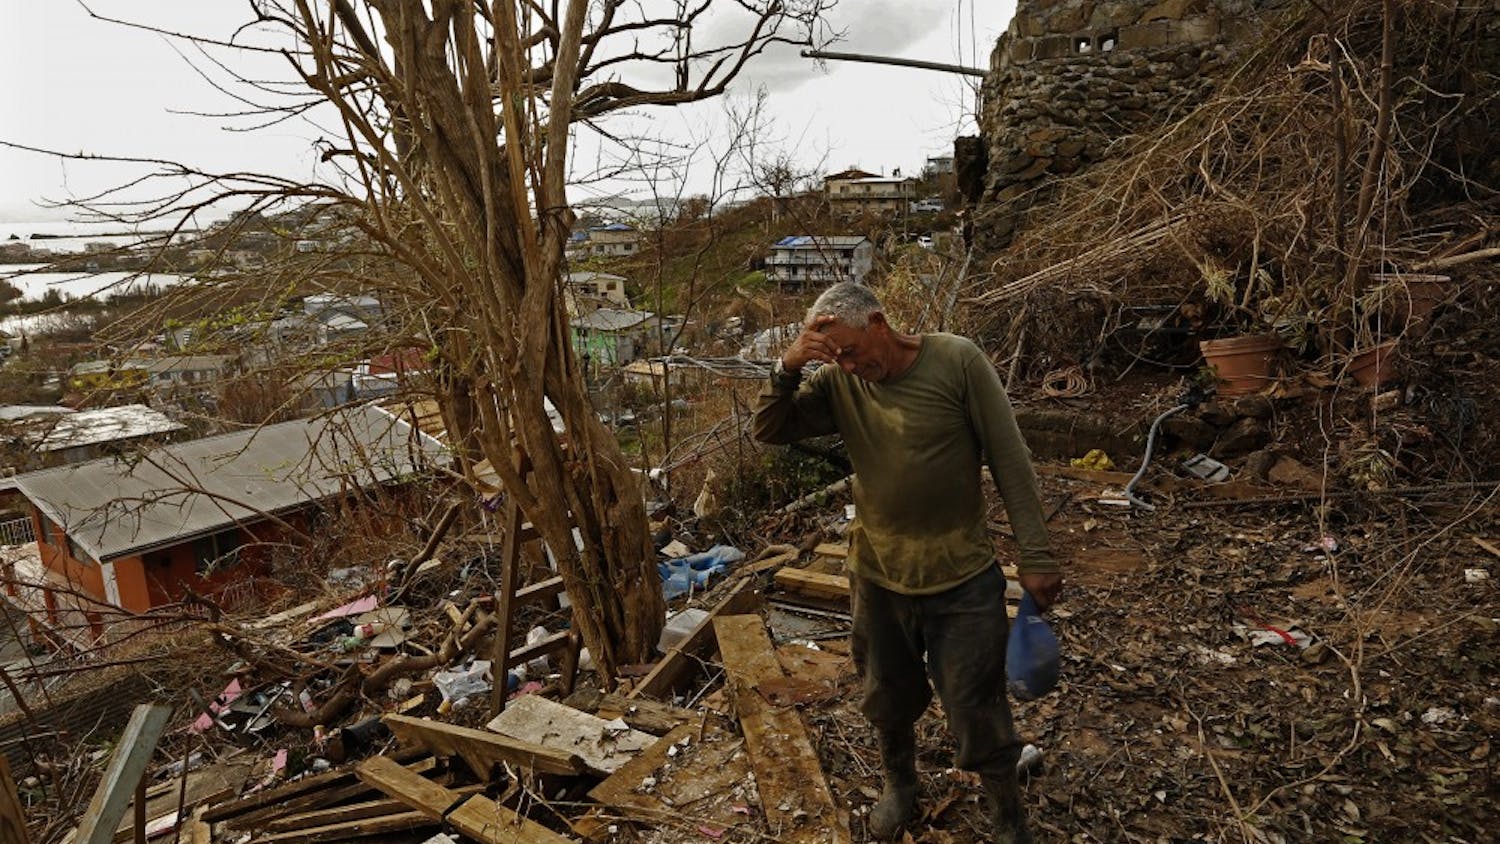 On the hill above Cruz Bay on St. John Island, the house where Eugenio Santana Santana, 61, was living was completely blown away by Hurricane Irma. Nothing remains. Originally from Dominica, Santana says he will stay and help rebuild the island because there is no work in his own country. (Carolyn Cole/Los Angeles Times/TNS)